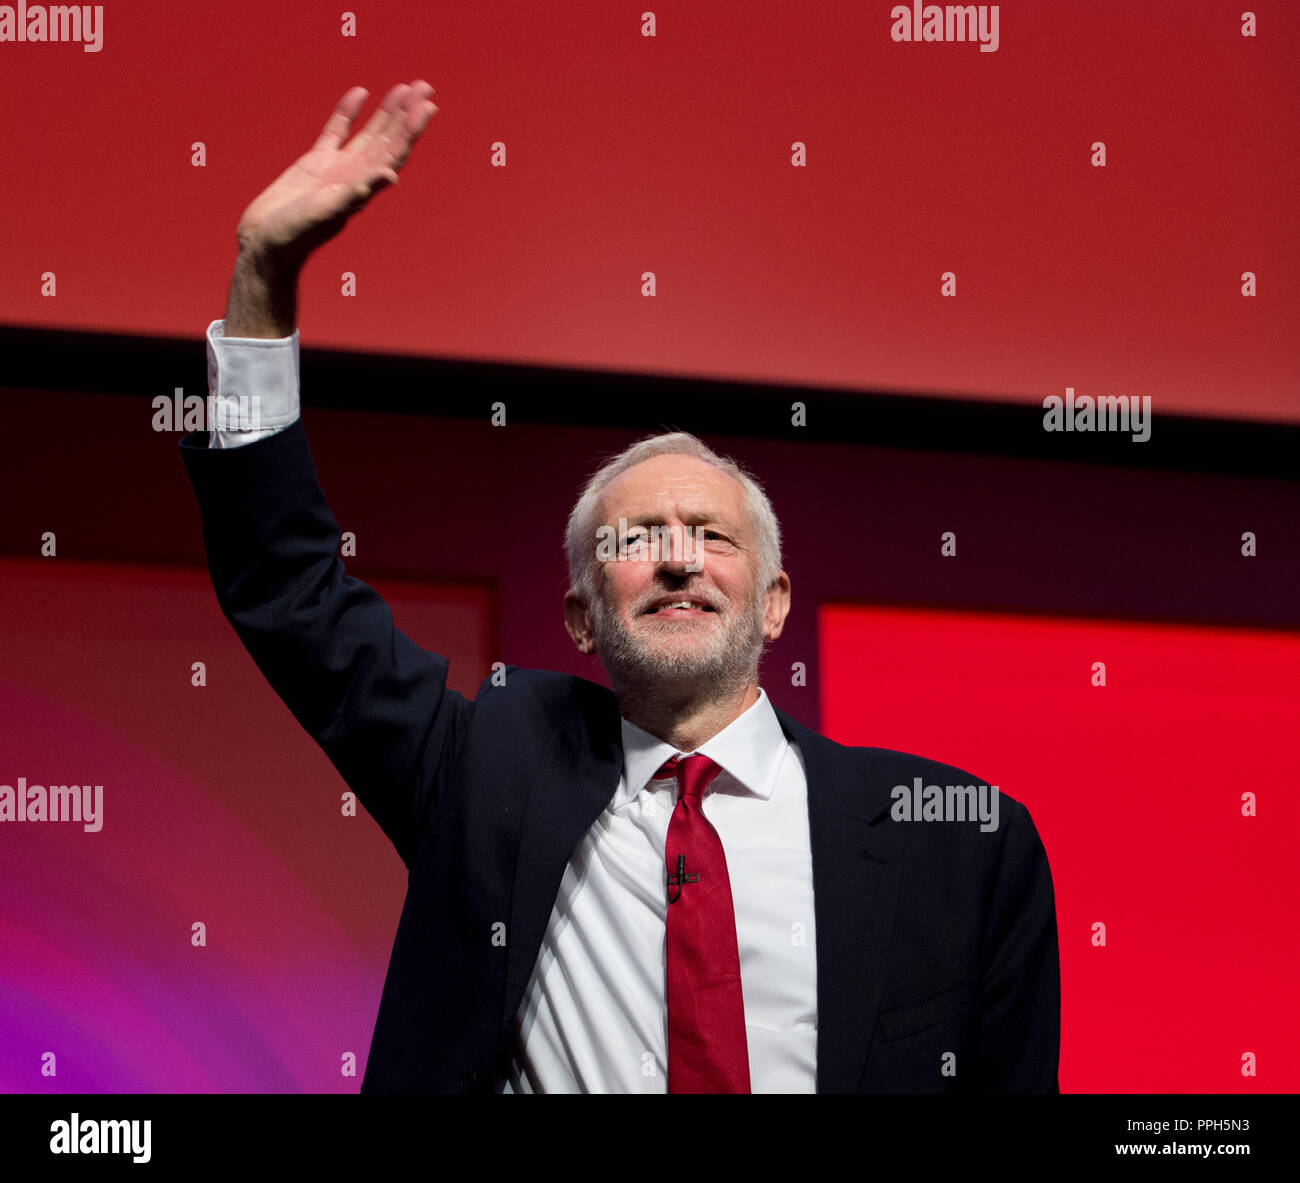 Liverpool, UK. 26th September 2018. Jeremy Corbyn, Leader of the Opposition, Leader of the Labour Party and Labour MP for Islington North, waves to delegate at the Labour Party Conference in Liverpool. © Russell Hart/Alamy Live News. Stock Photo